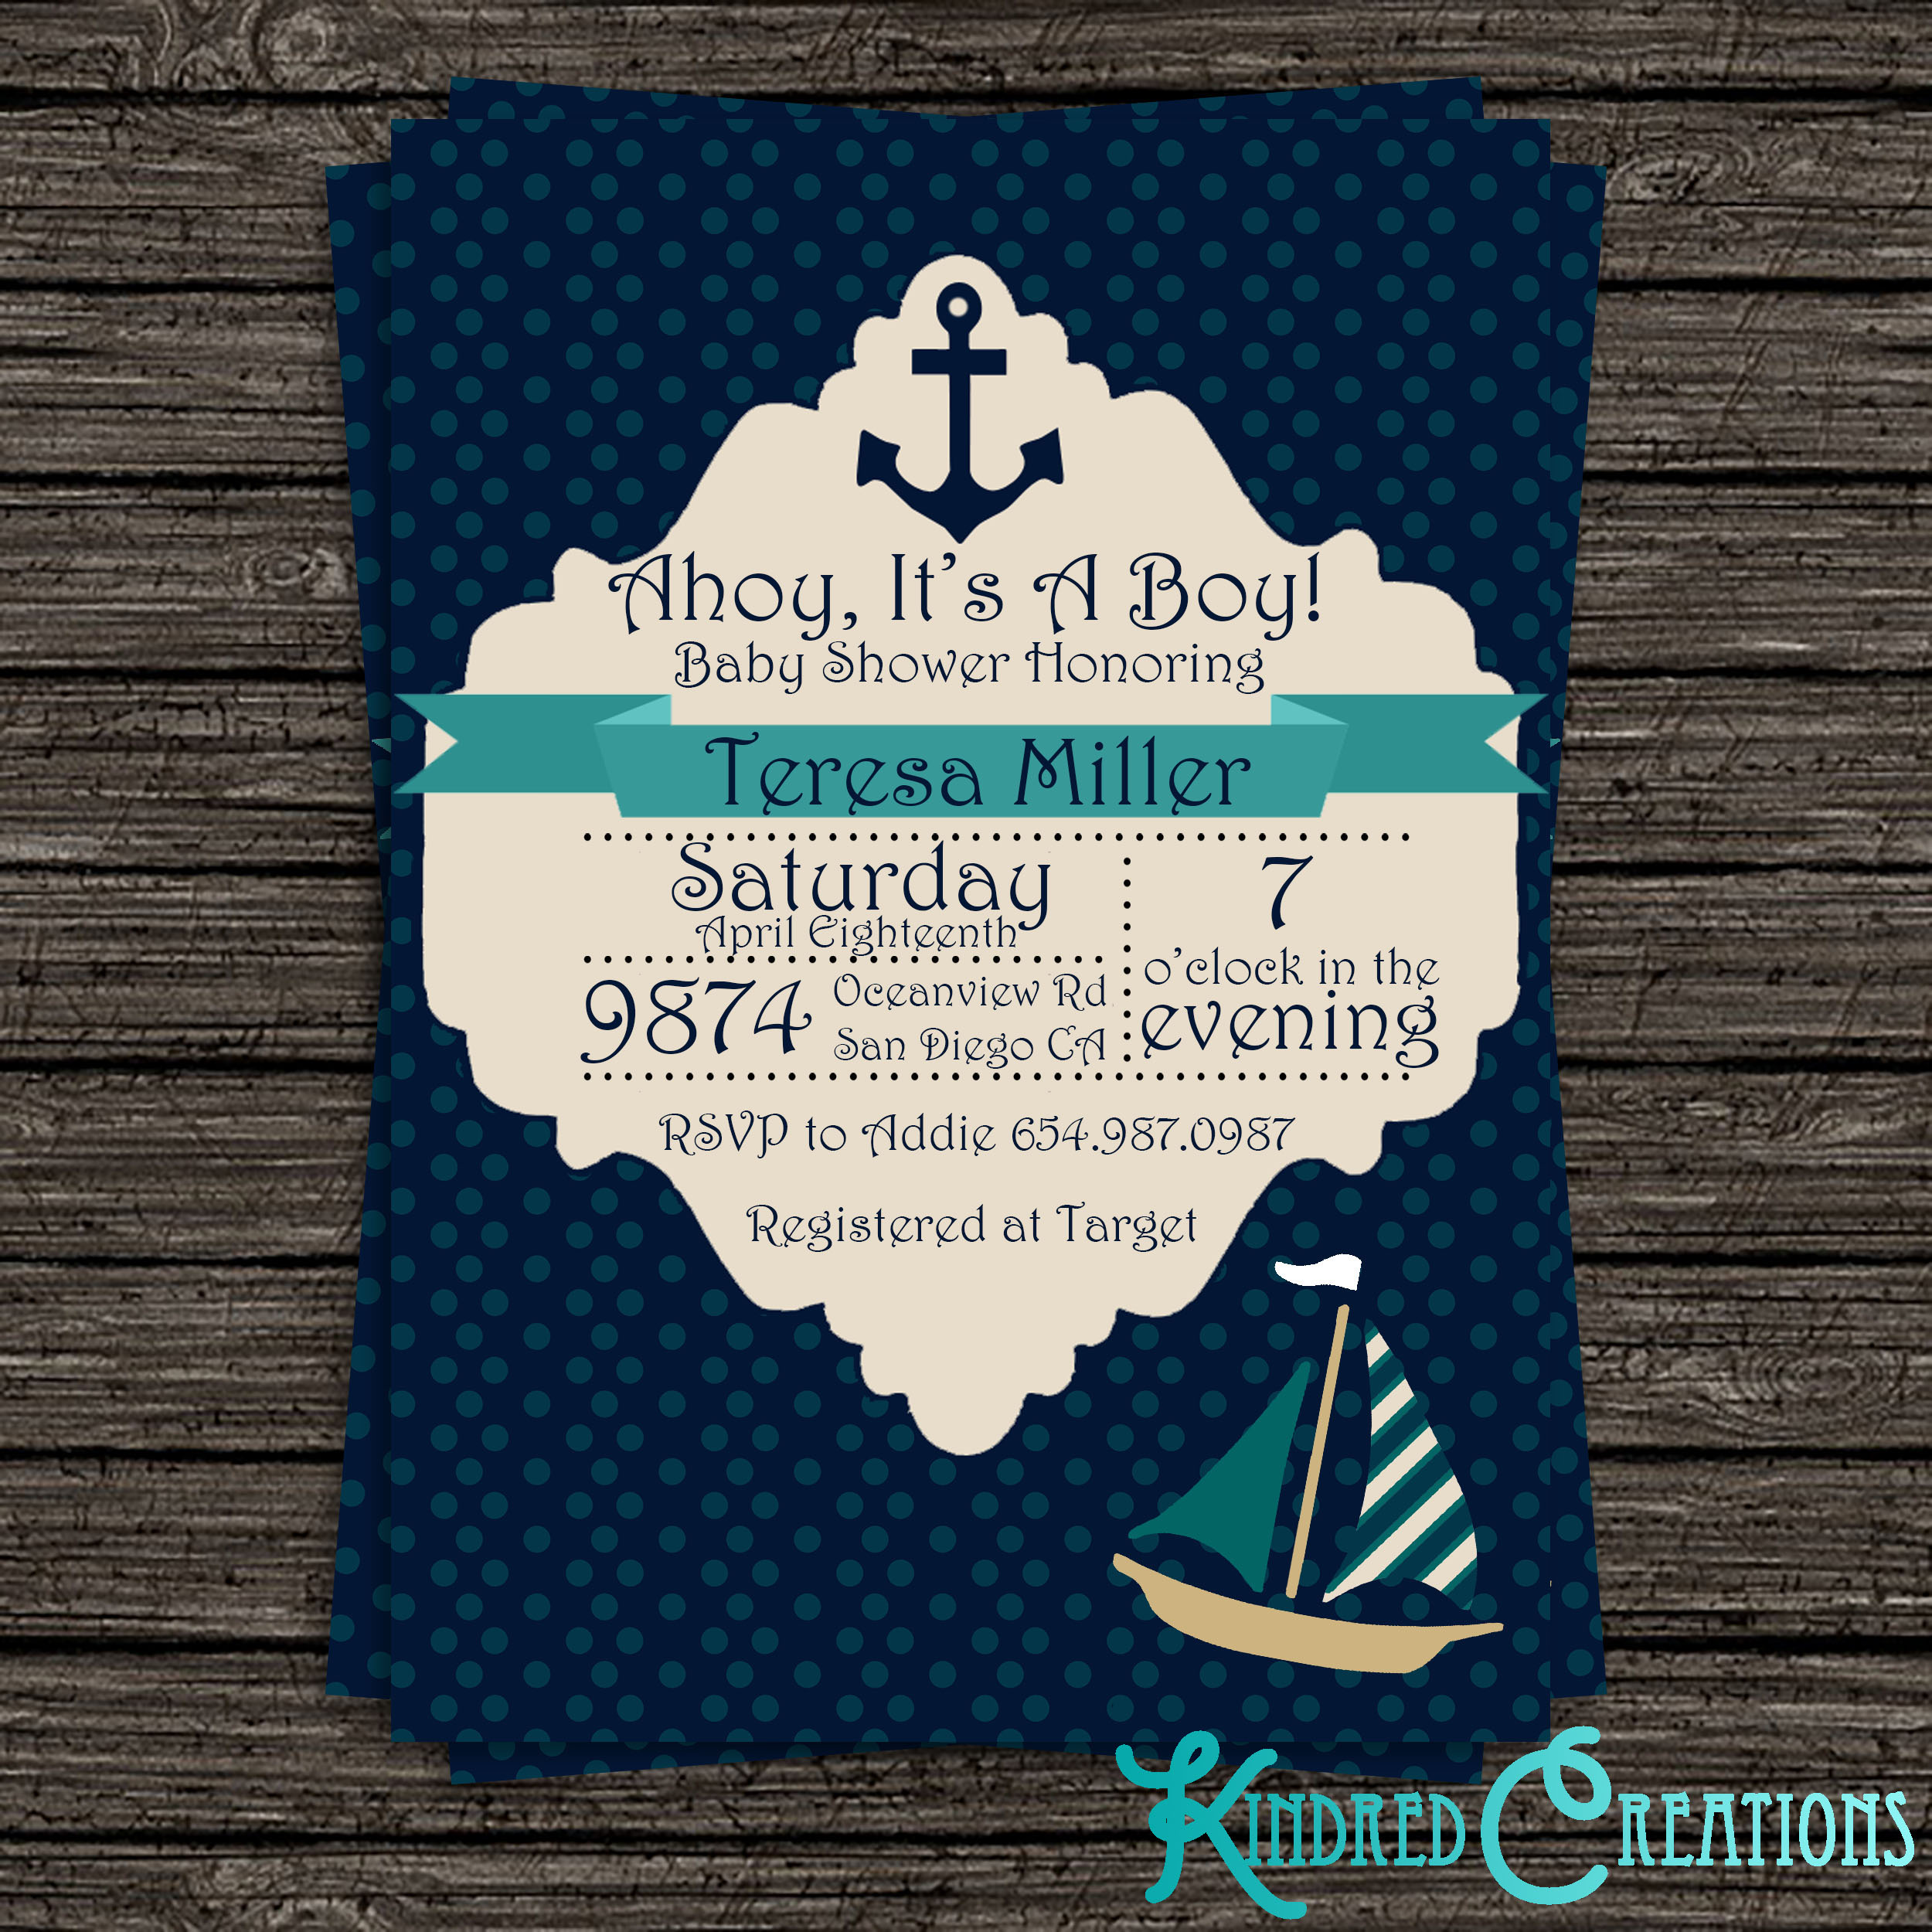 Full Size of Baby Shower:cheap Invitations Baby Shower Homemade Baby Shower Decorations Baby Shower Centerpiece Ideas For Boys Homemade Baby Shower Centerpieces Elegant Baby Shower Oriental Trading Baby Shower Baby Shower Favors Ideas For Baby Shower Centerpieces